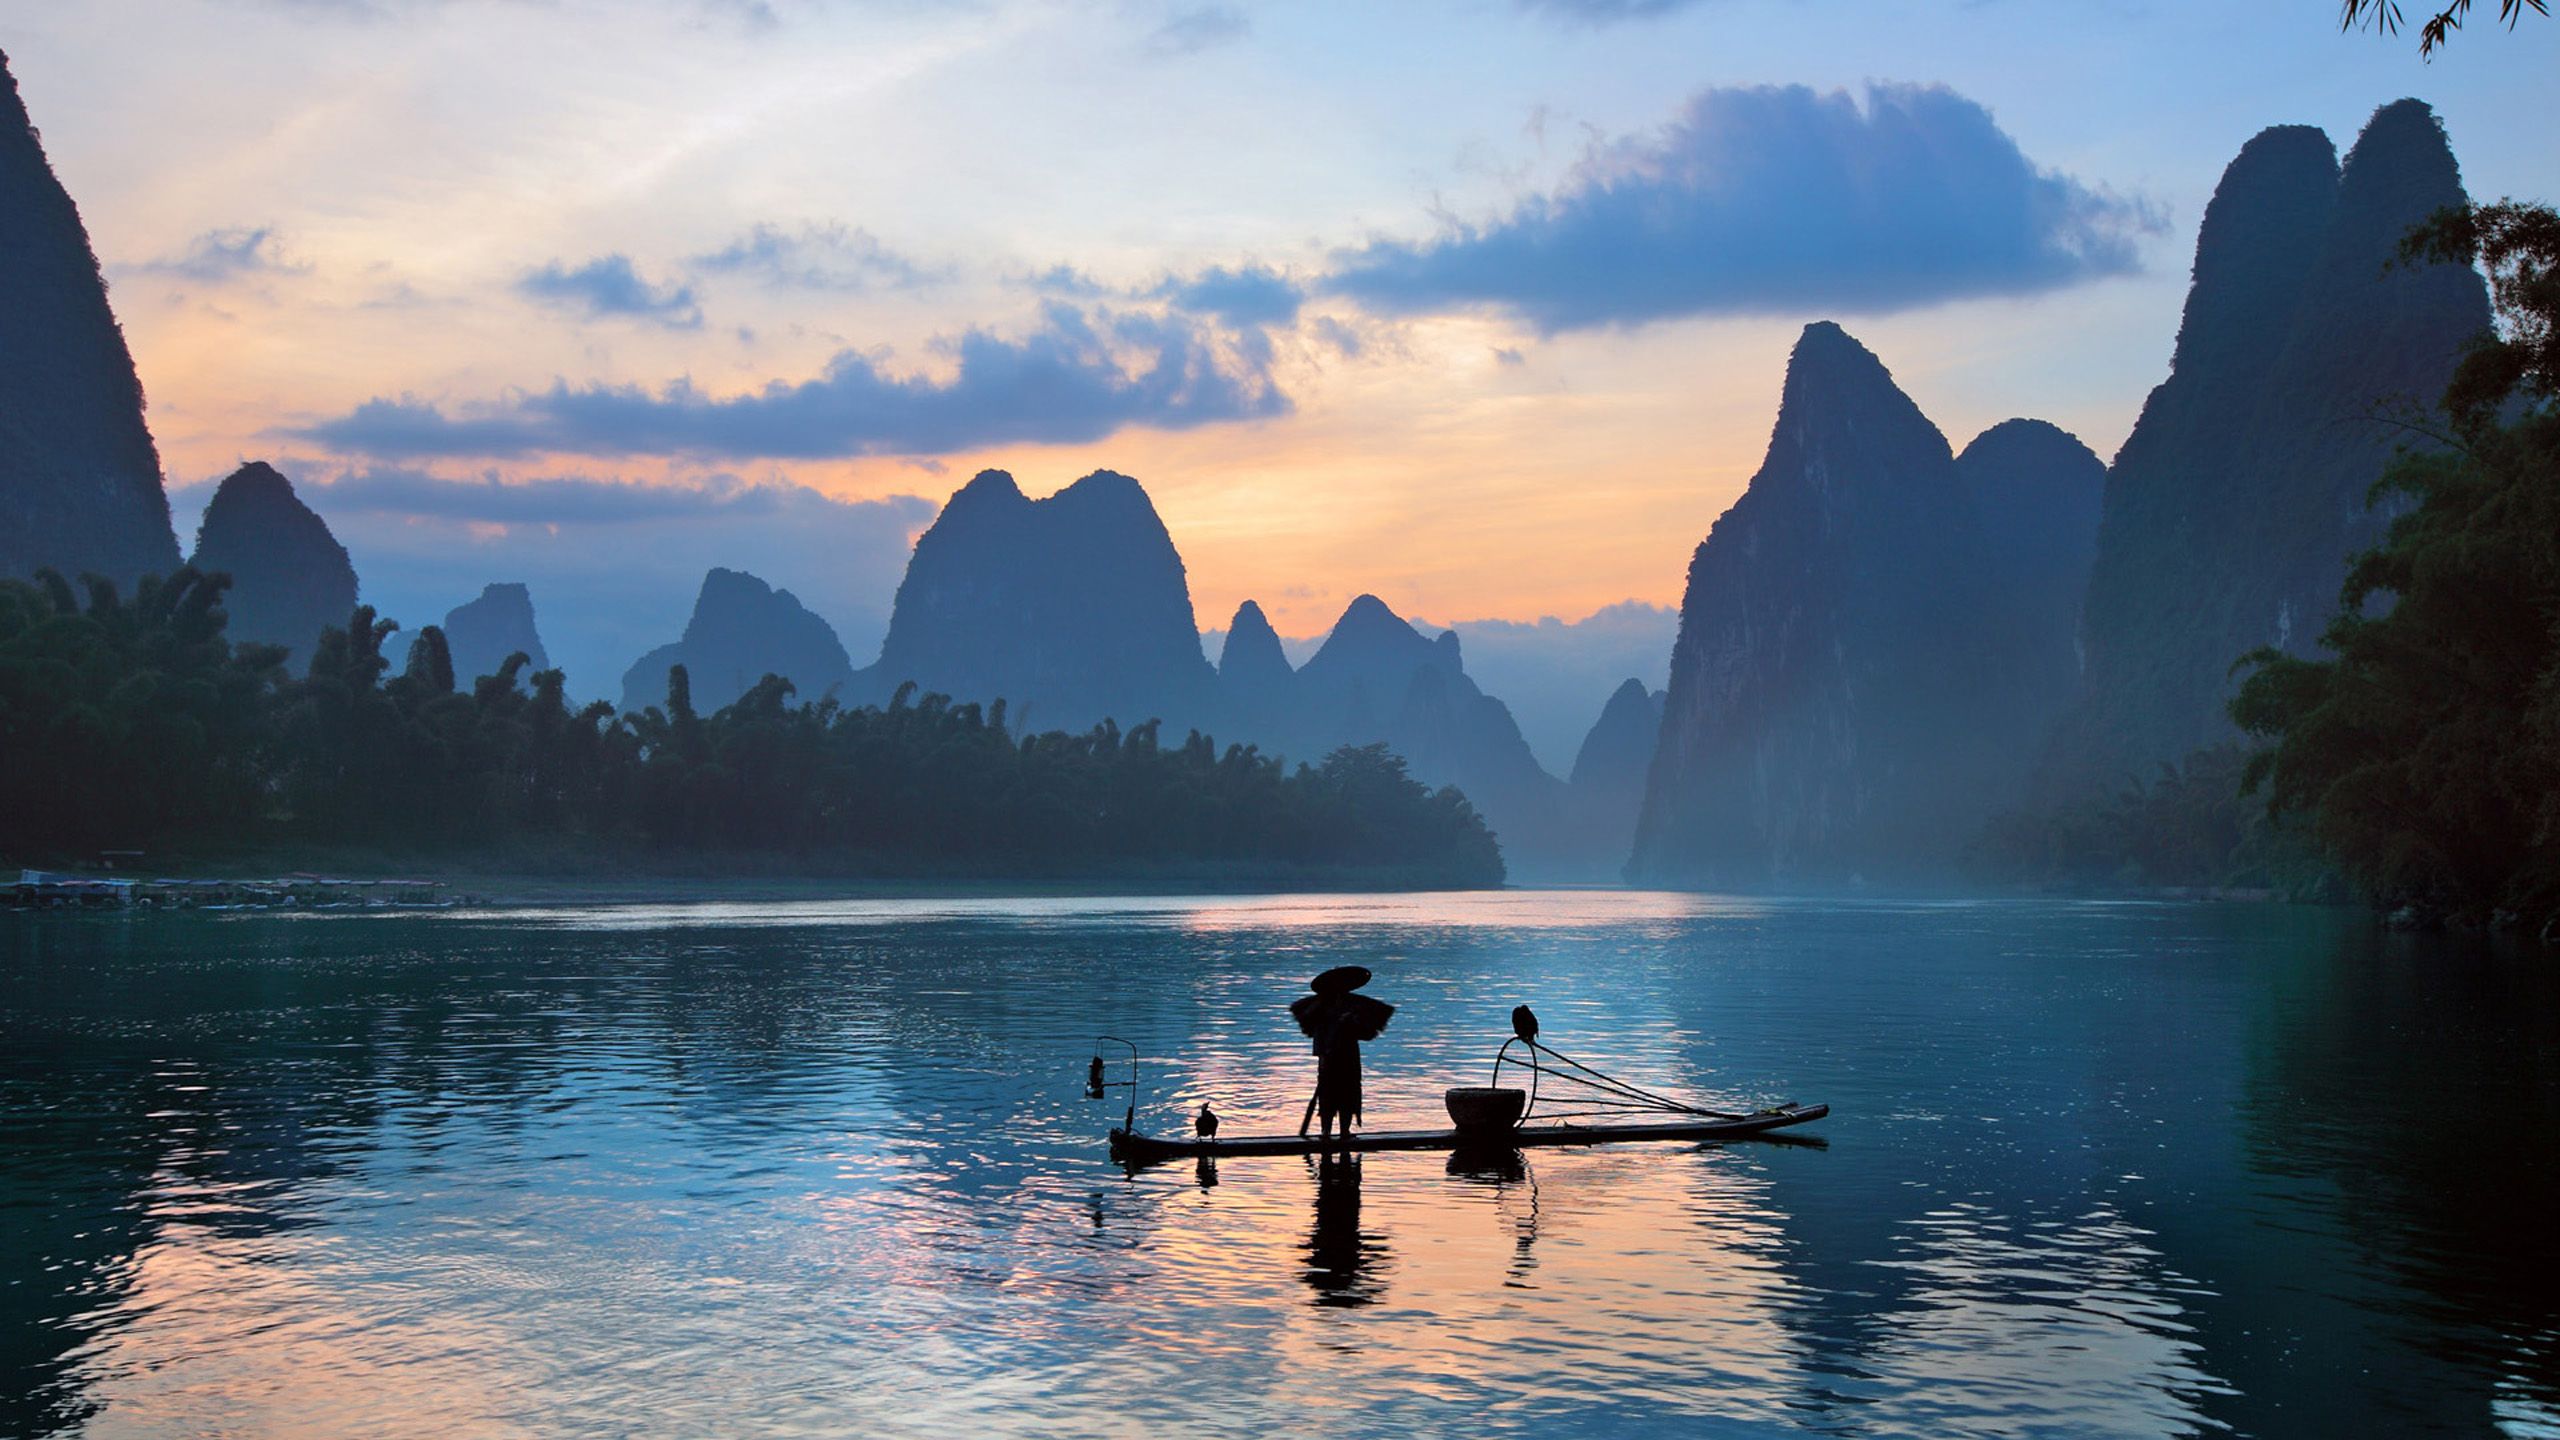 China Guilin Scenery Inspiration For Acrylic Painting